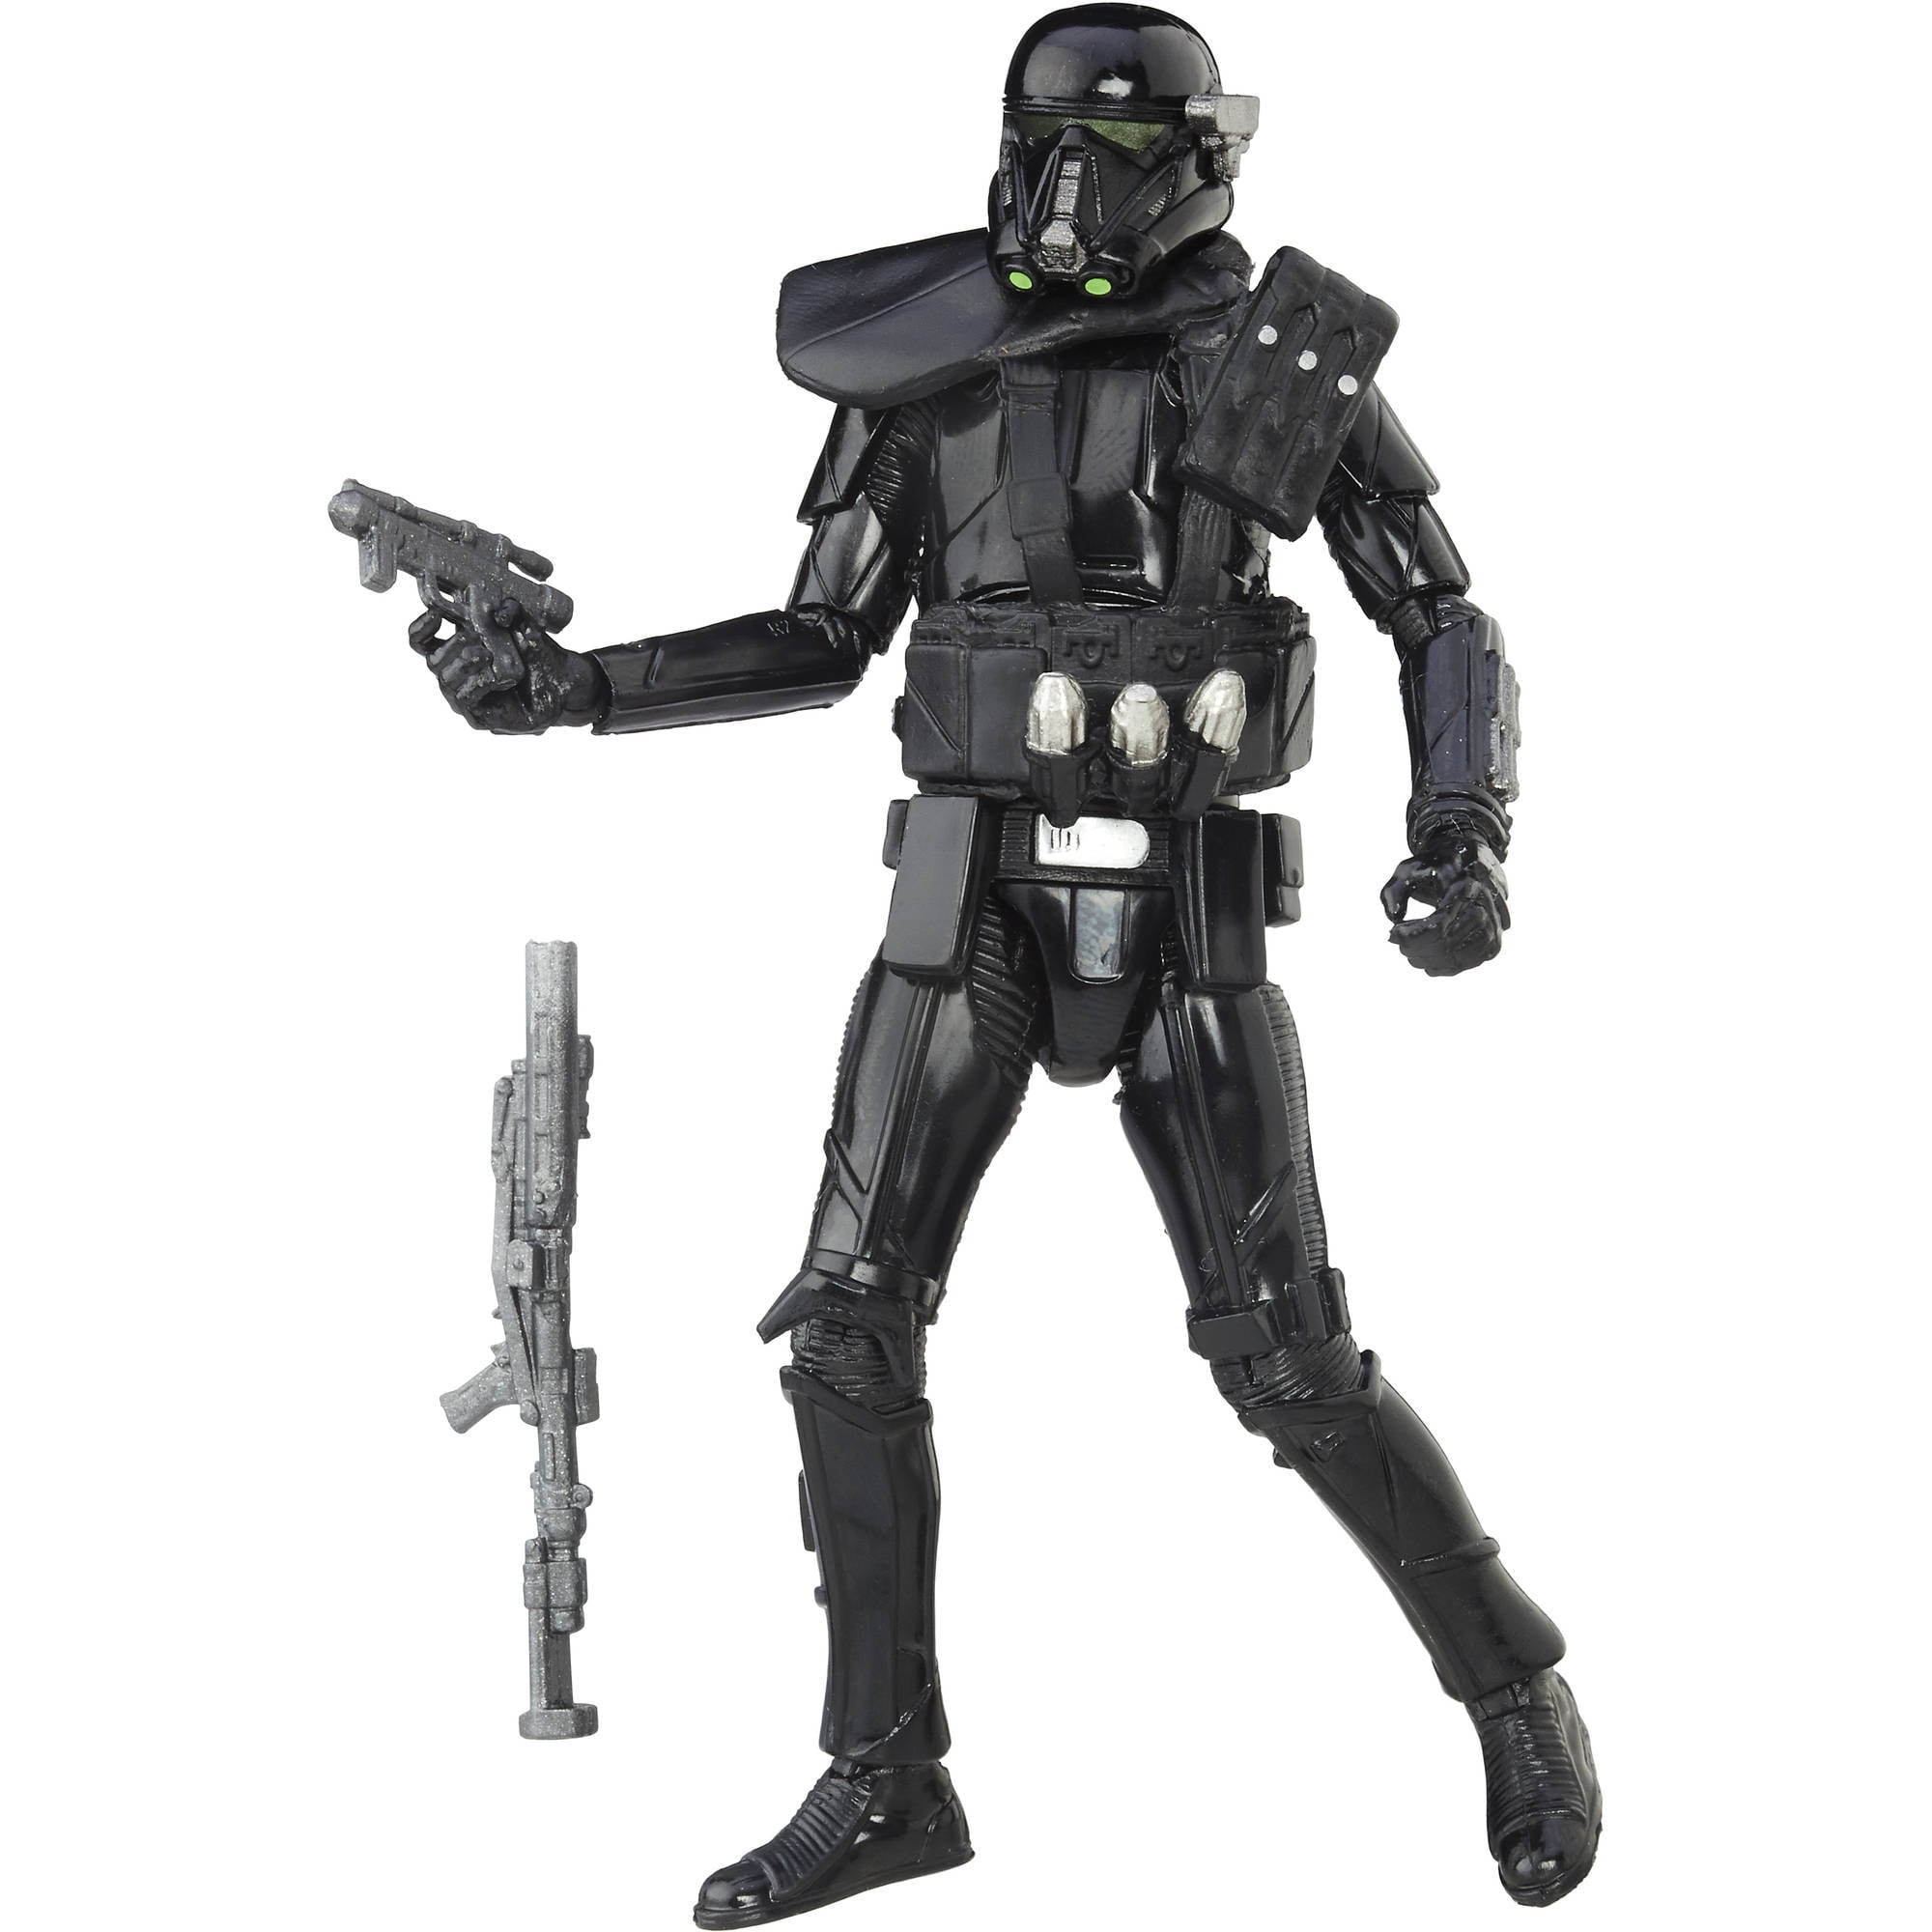 Star Wars Rogue One IMPERIAL DEATH TROOPER 3.75"-inch Action Figure by Hasbro